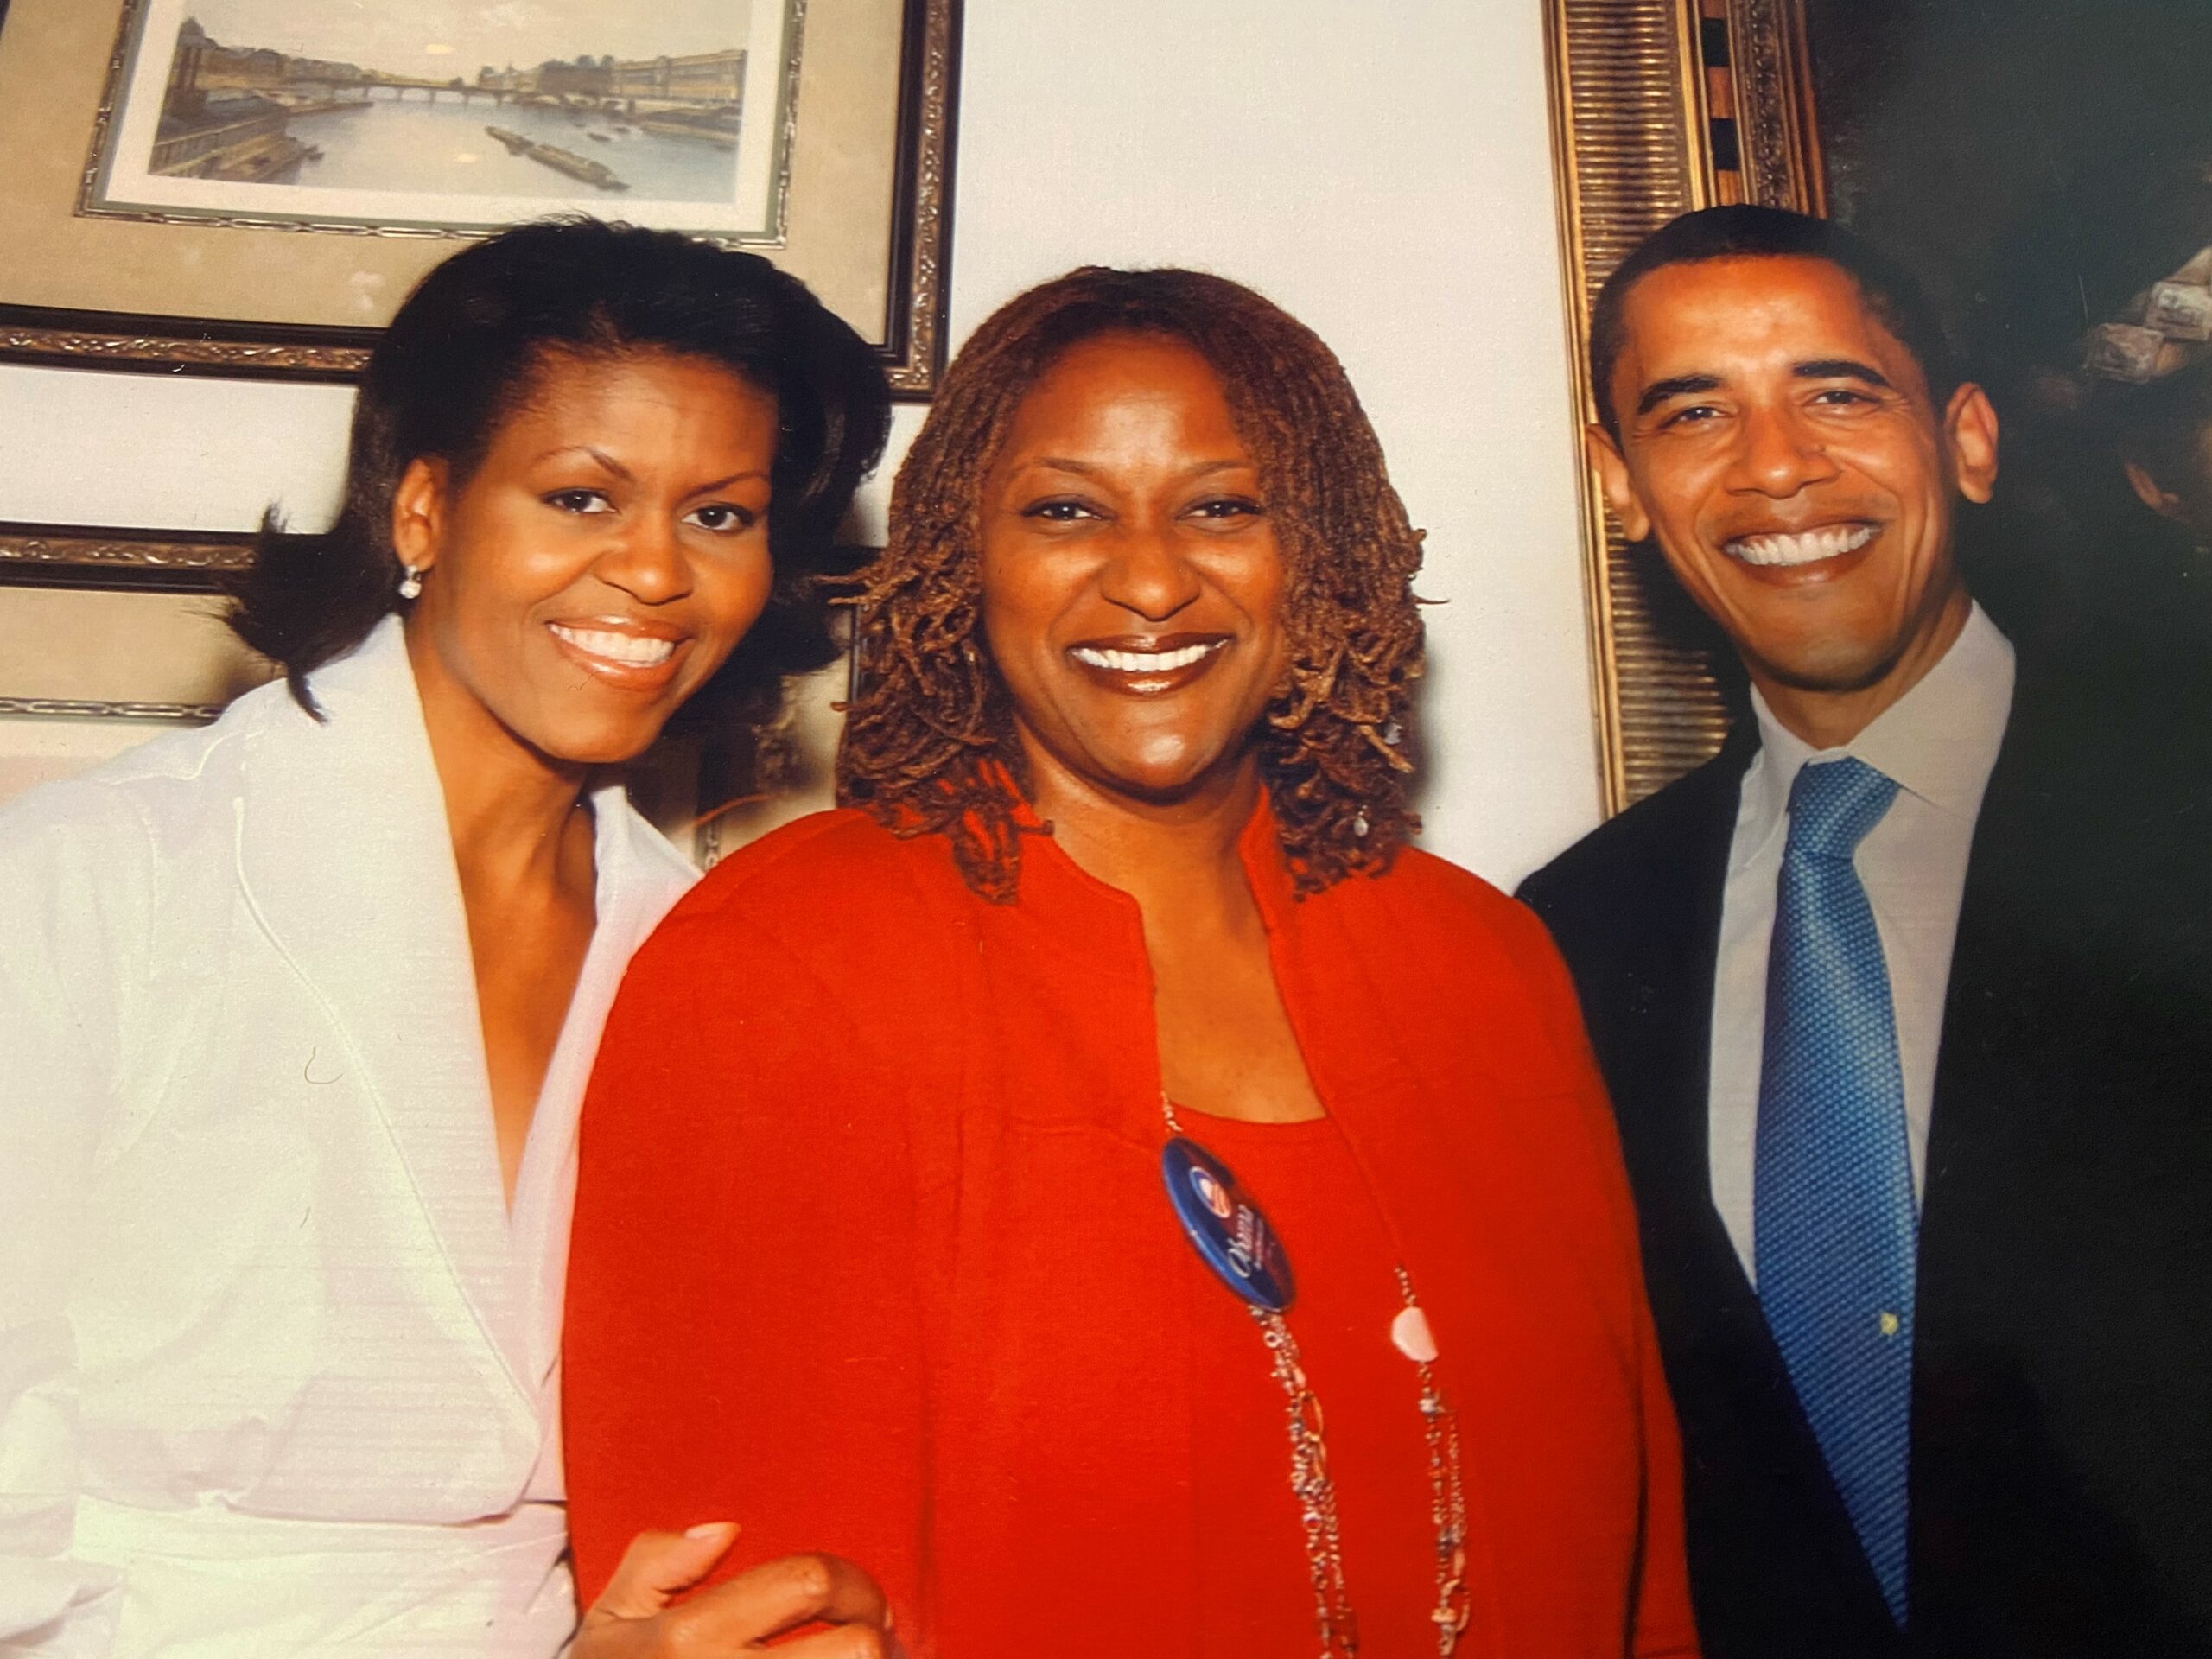 Holly J. Mitchell and Obamas